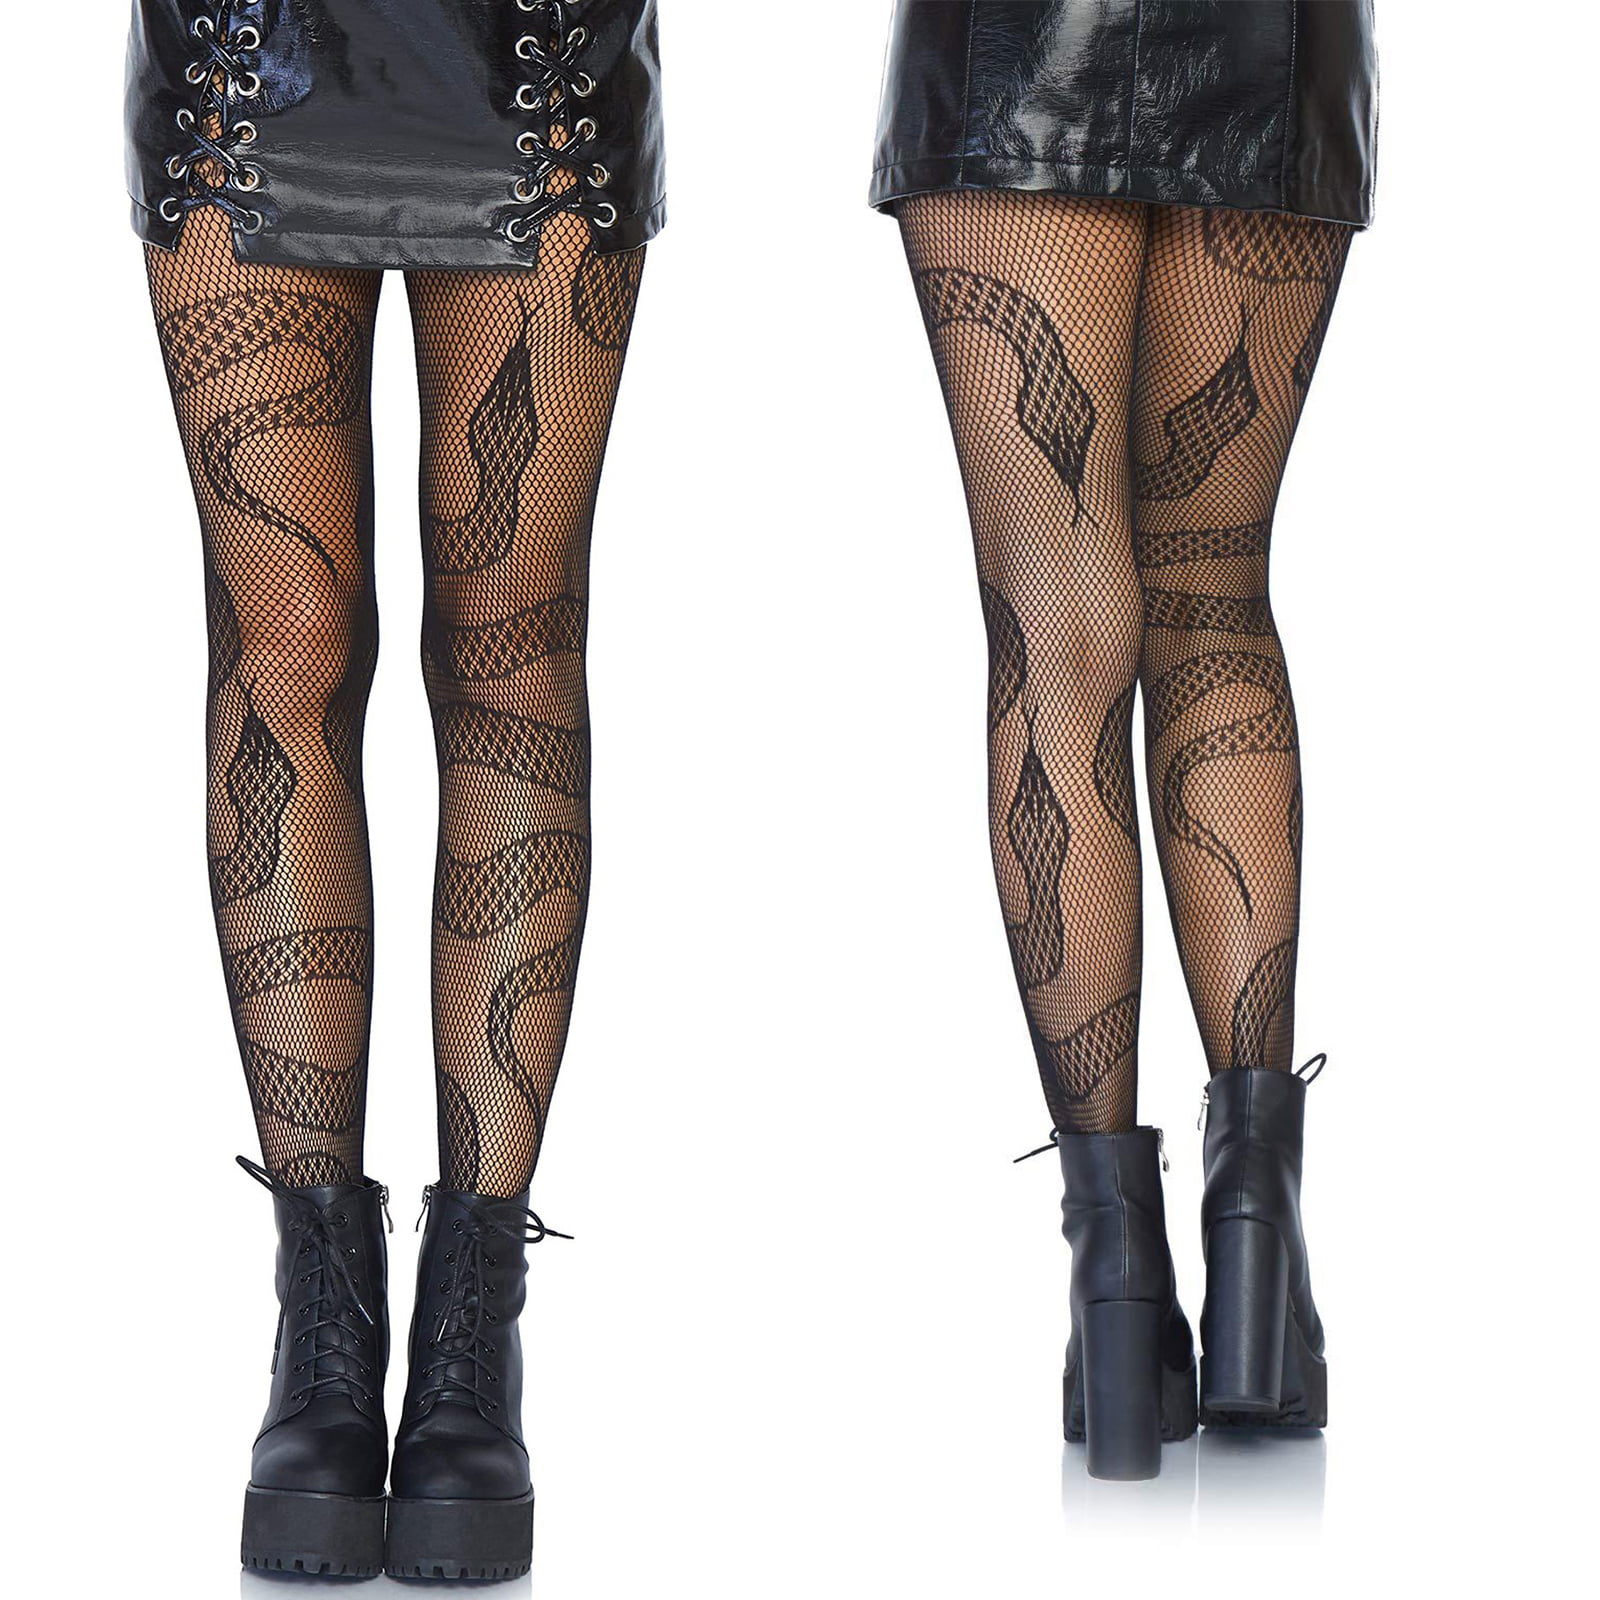 Sexy Socks Snake Tights Women Anime Pantyhose 2023 Black Mesh Fishnet  Stockings Sexy Harajuku Hosiery Large Lolita G Tights Gothic Clothes Z0407  From Misihan09, $4.81